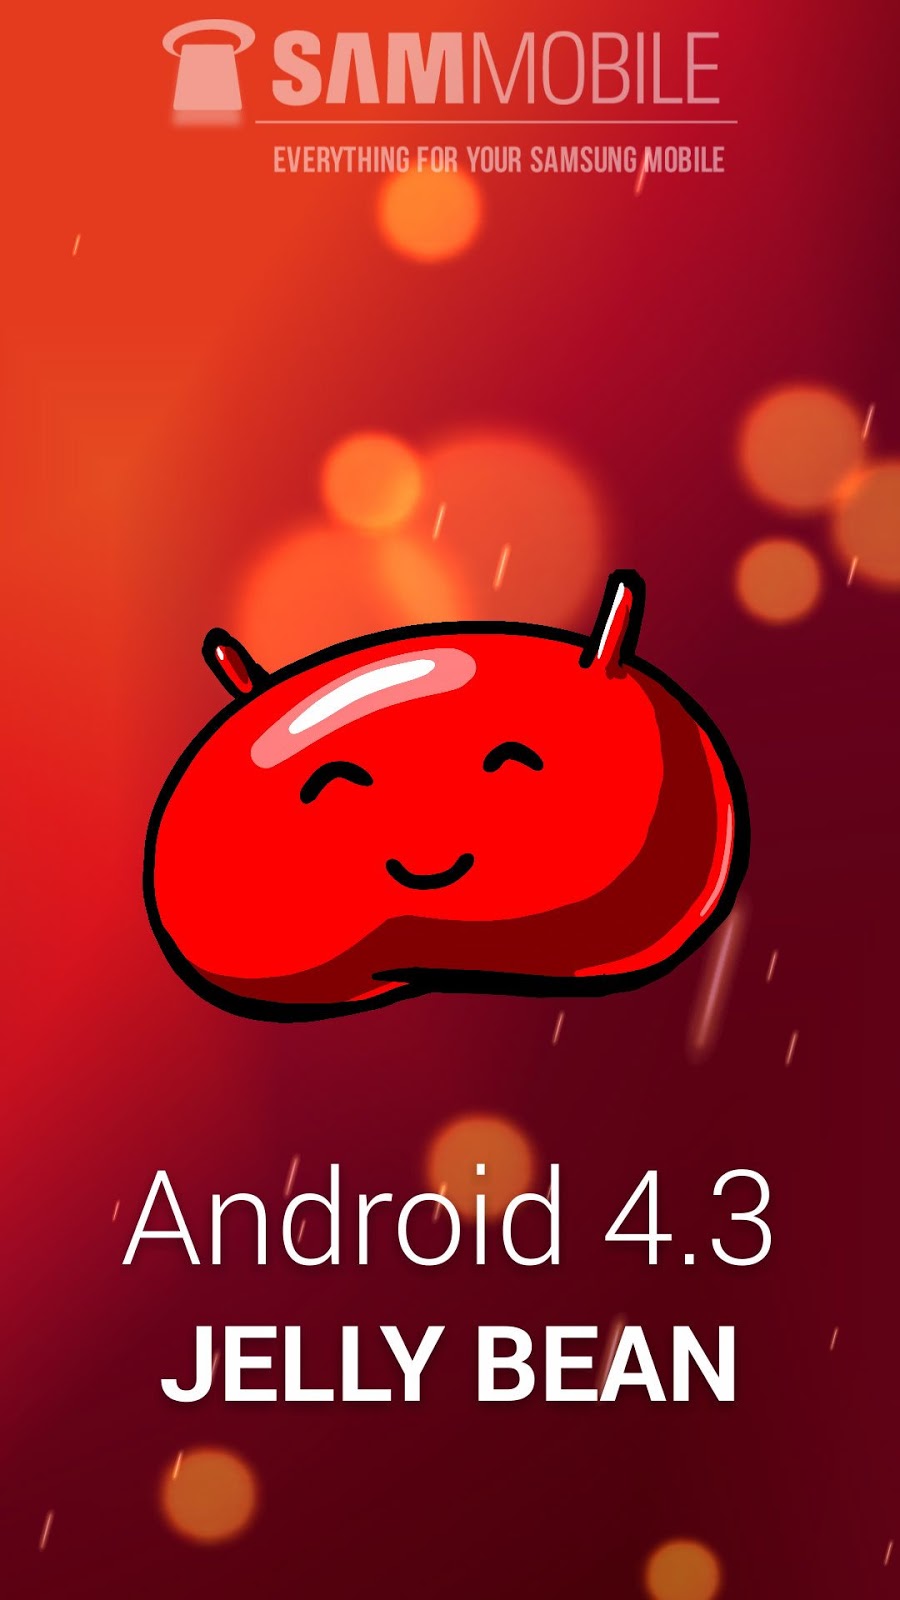 Android os 4.1.2 jelly bean download